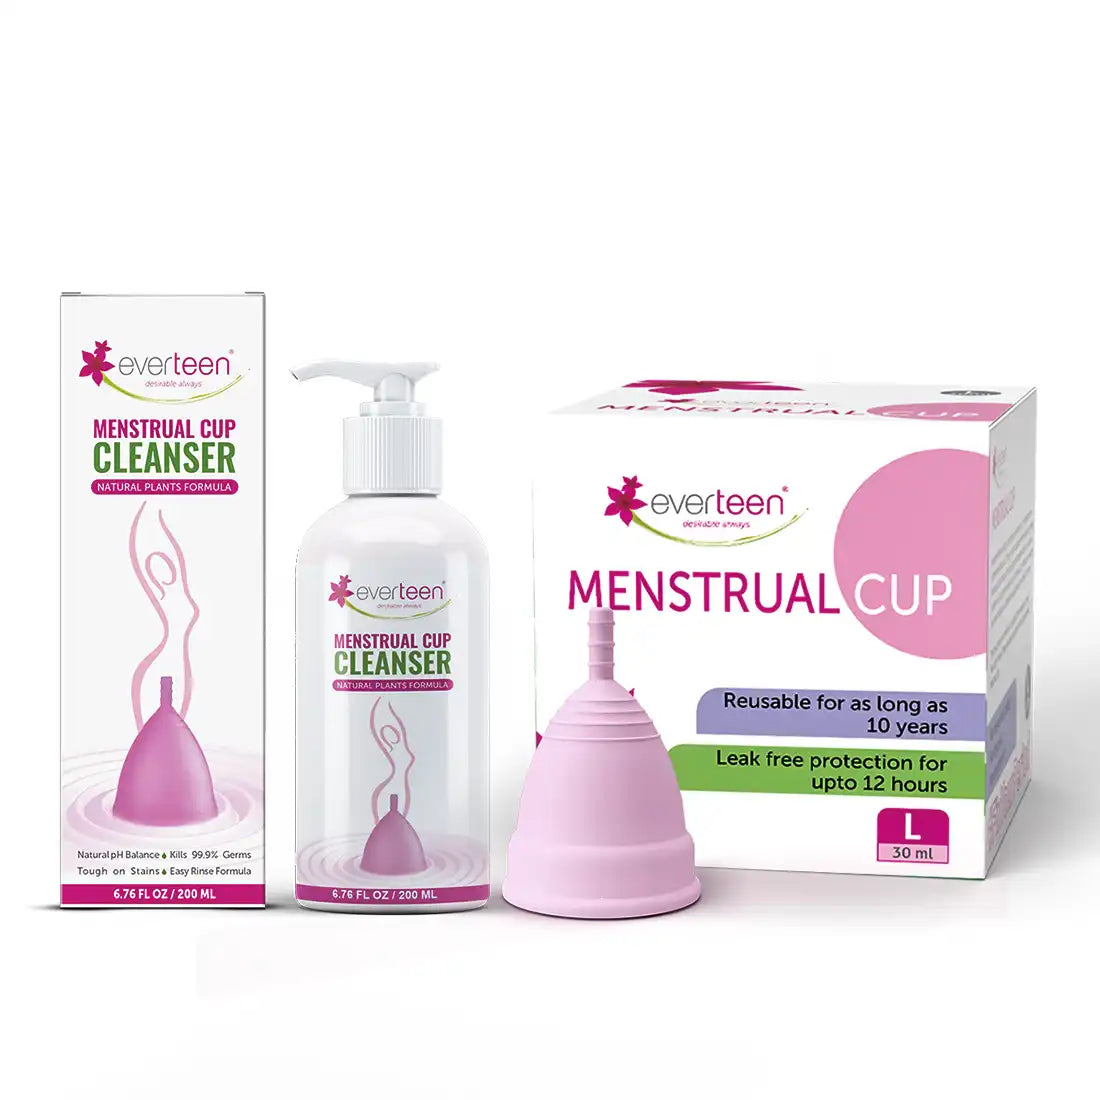 everteen Combo - Menstrual Cup and Menstrual Cup Cleanser for Periods in Women - everteen